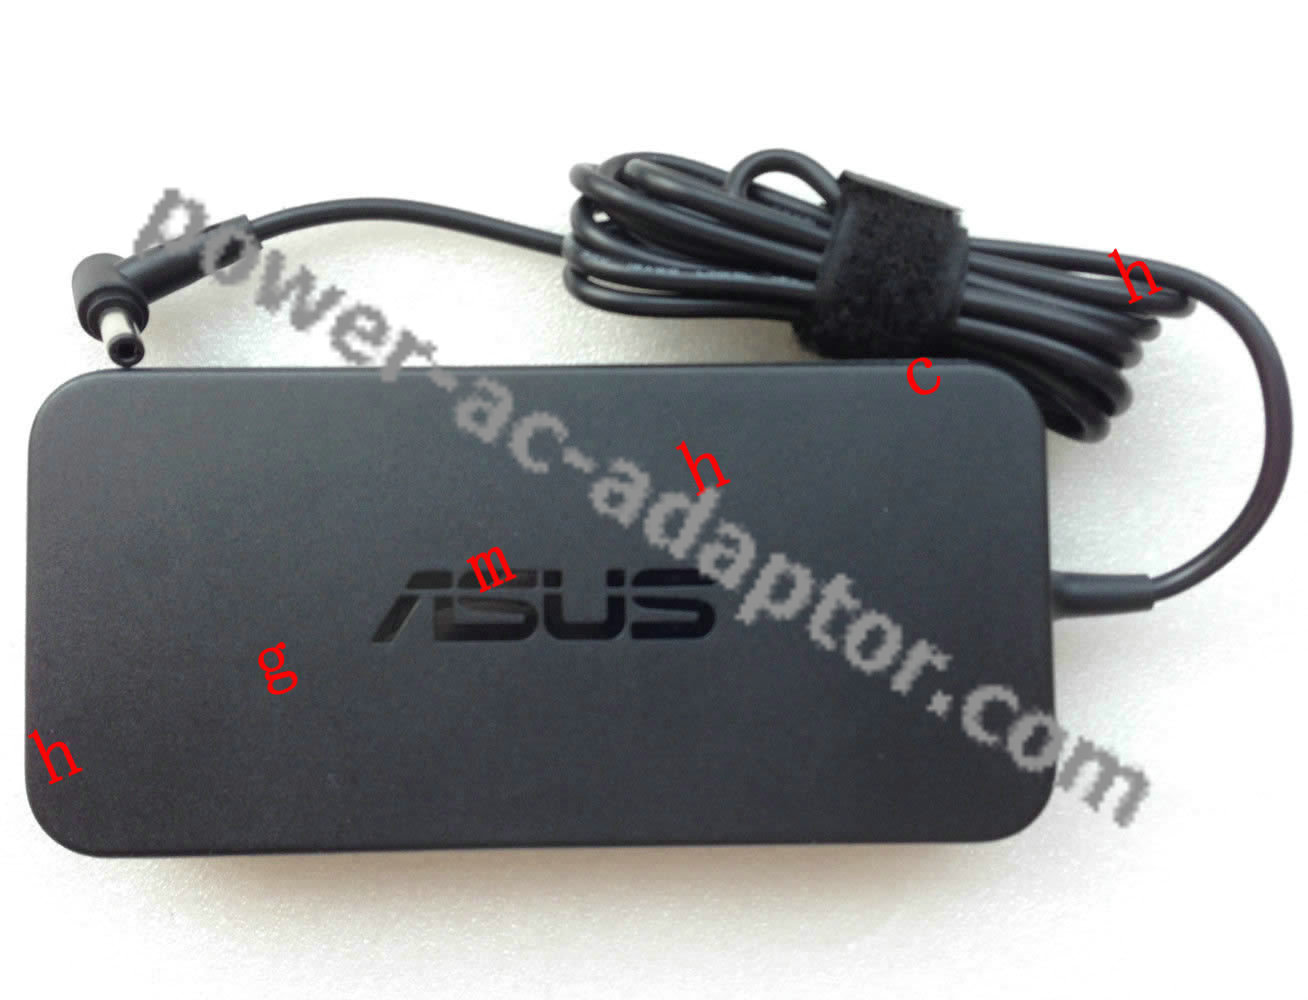 19V 6.32A ASUS N550JV-DB72T/i7-4700HQ Touch Notebook AC Adapter